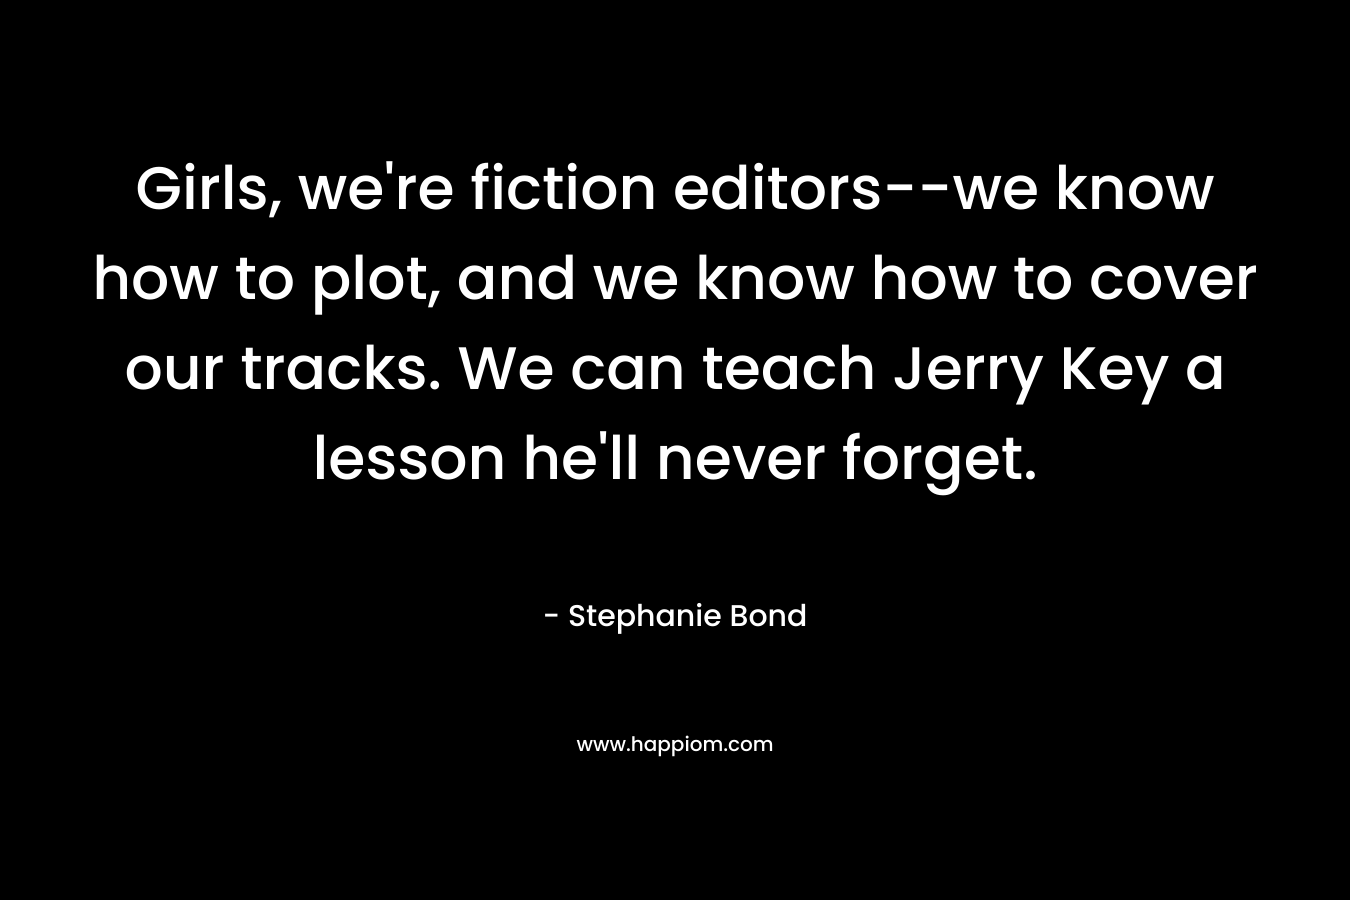 Girls, we’re fiction editors–we know how to plot, and we know how to cover our tracks. We can teach Jerry Key a lesson he’ll never forget. – Stephanie Bond